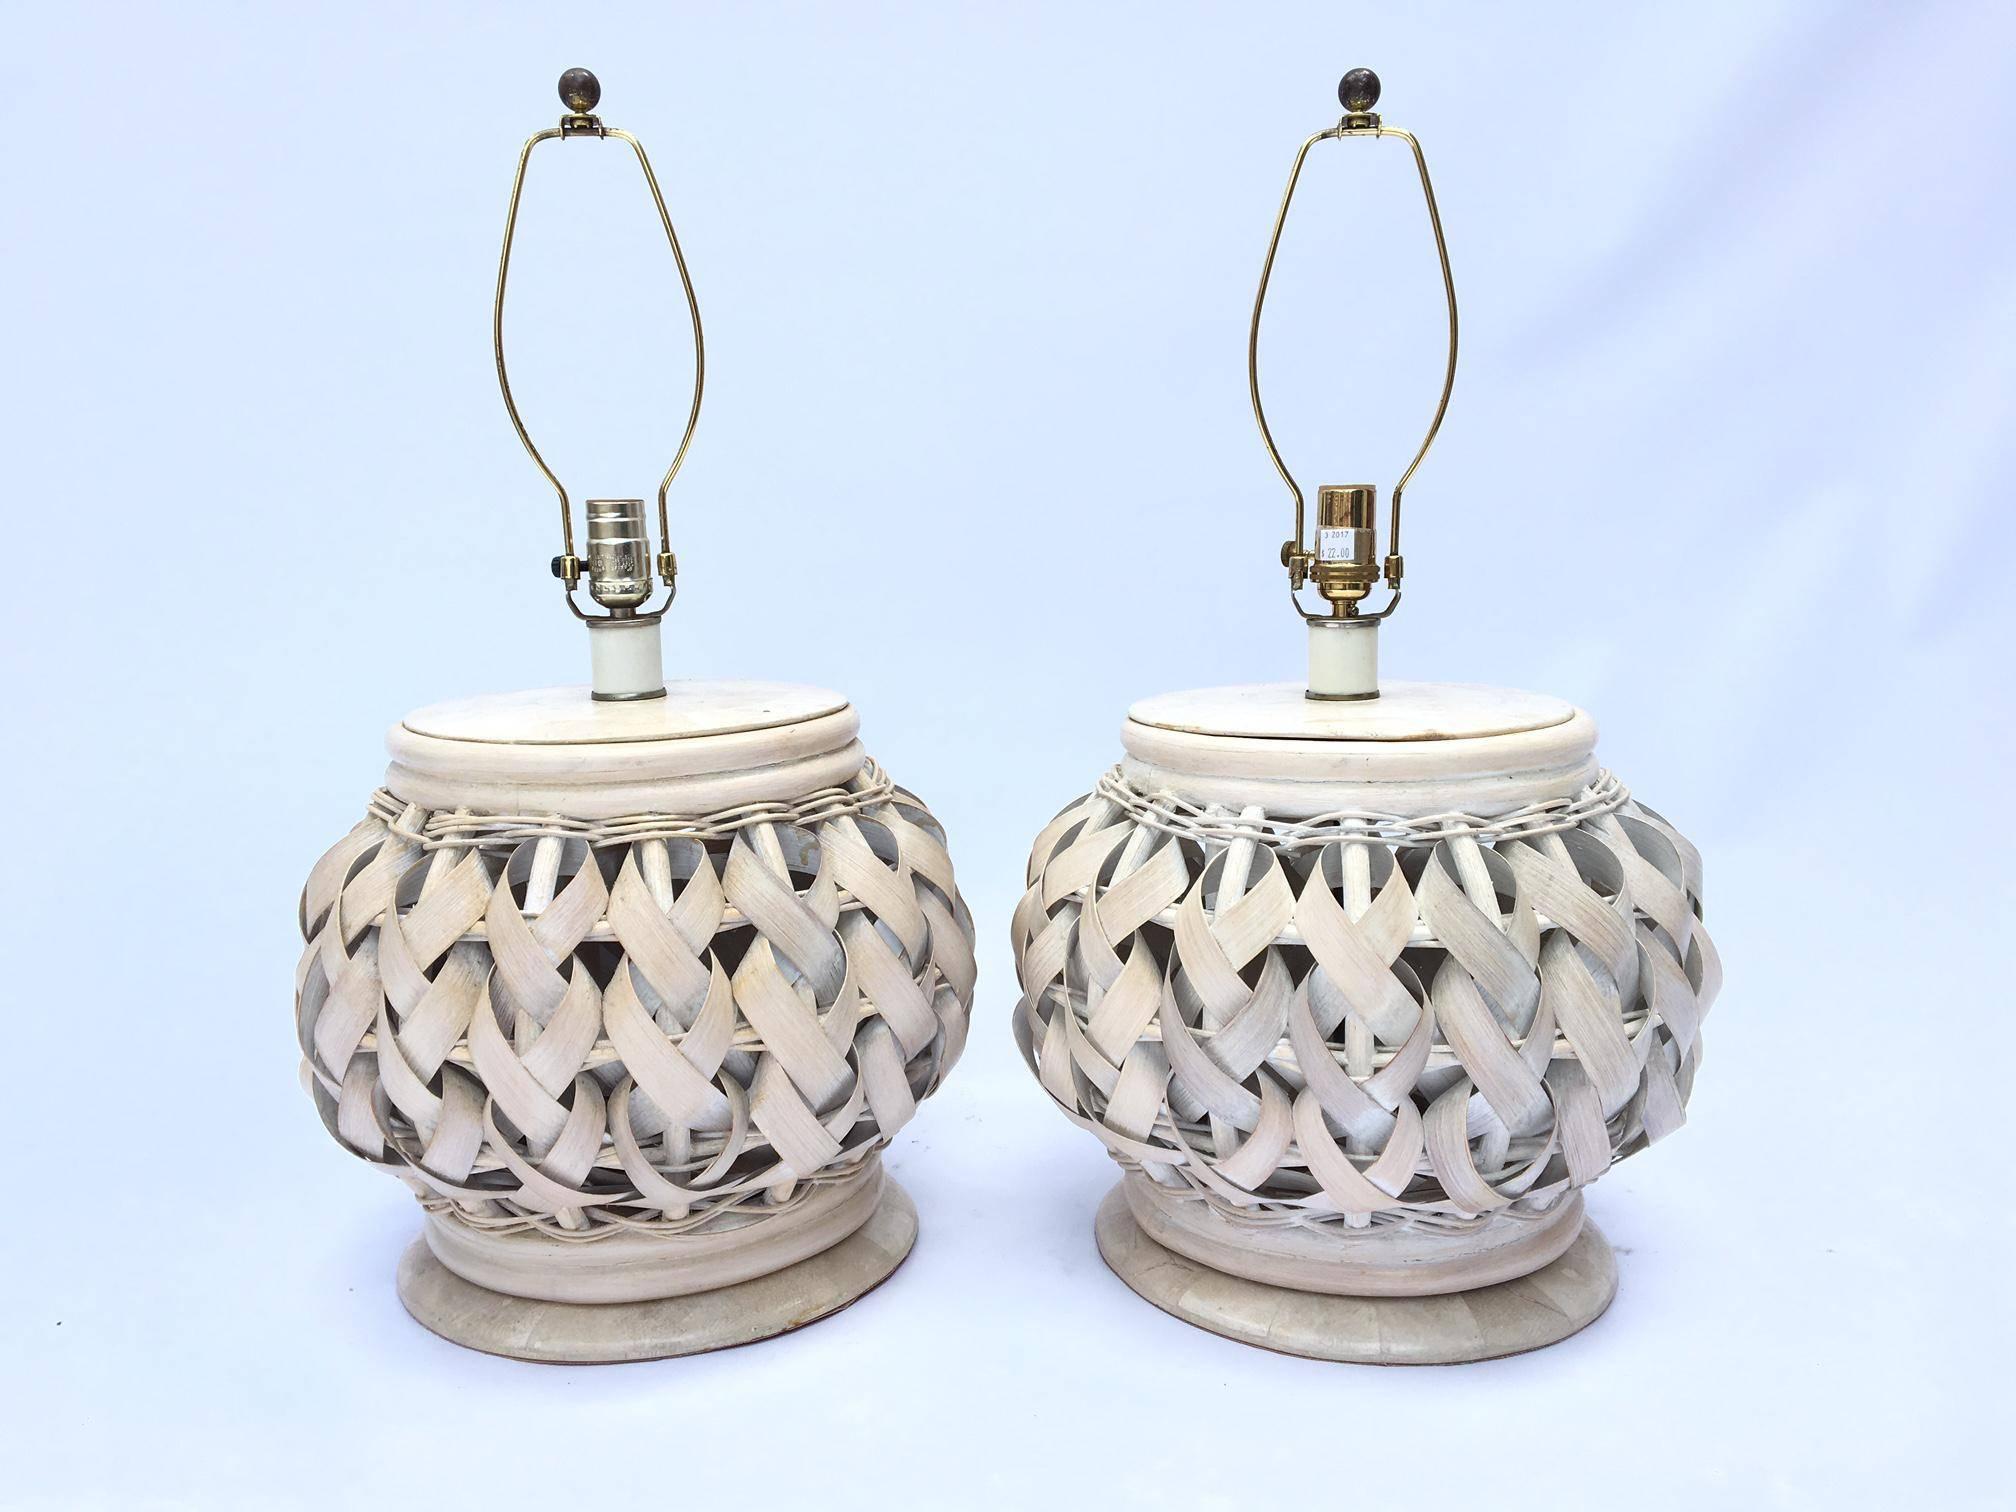 Pair of woven rattan lamps feature wide rattan woven into intricate braid patterns. Excellent vintage condition.
Lamps measure 25.5